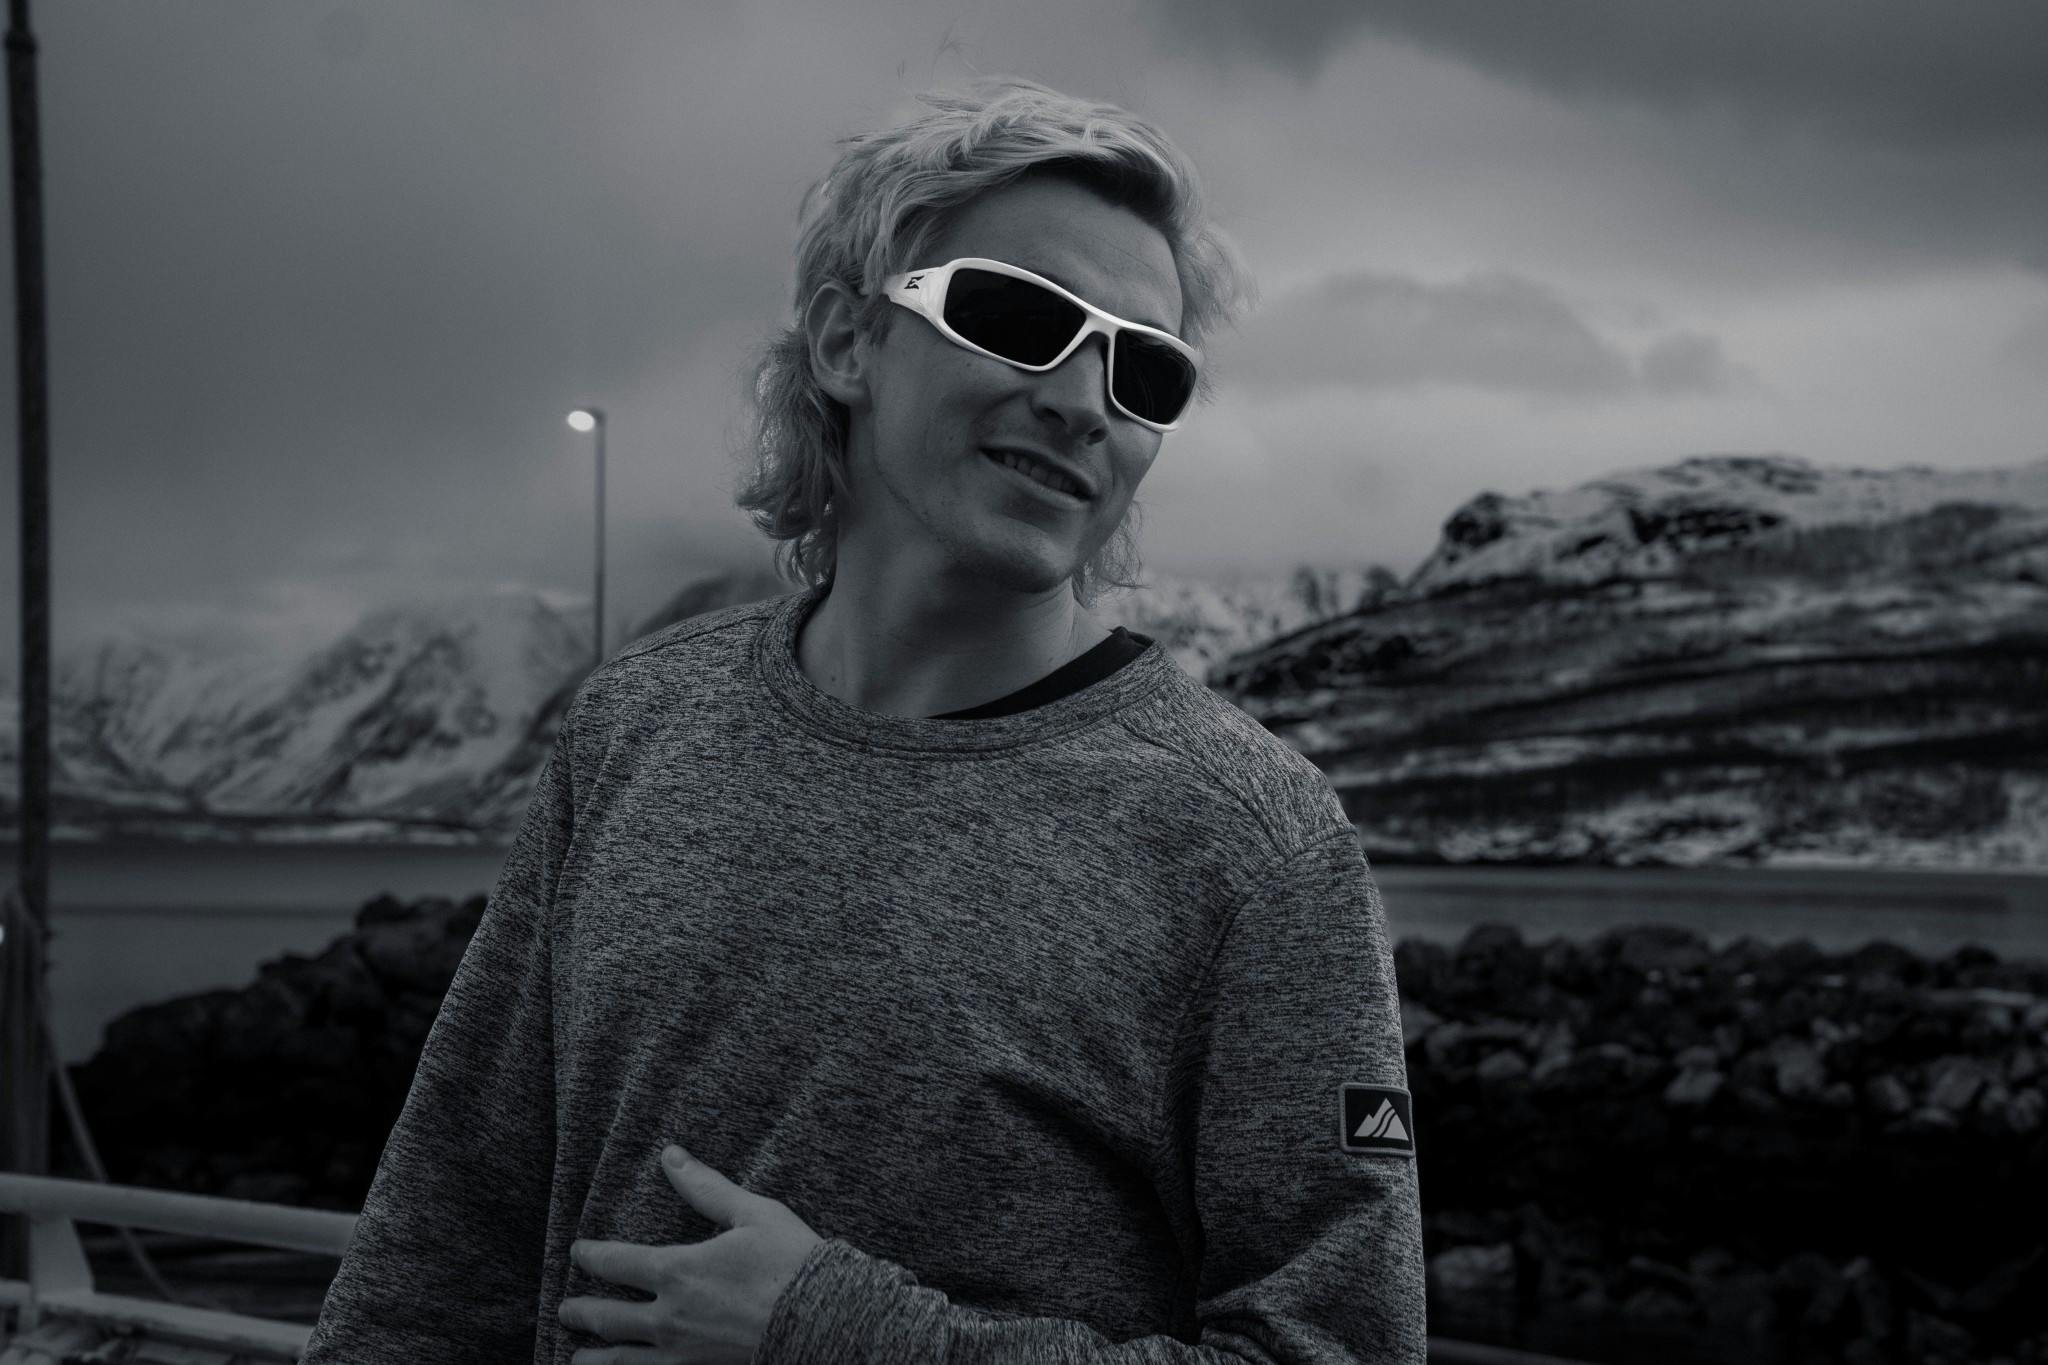 A black and white photo of a man with sunglasses